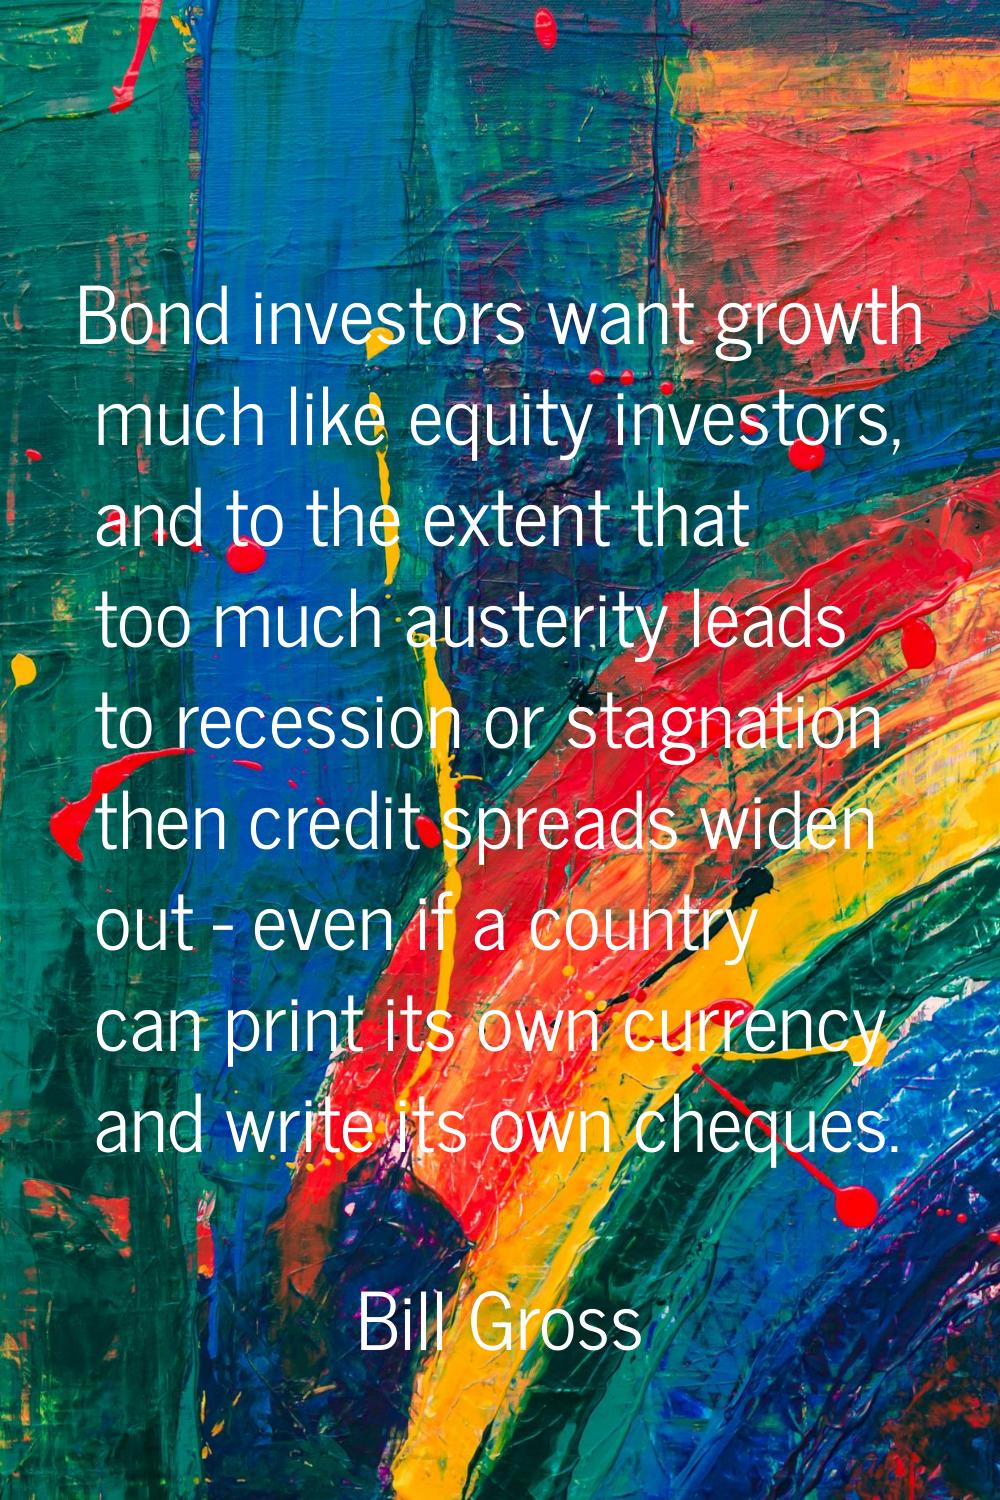 Bond investors want growth much like equity investors, and to the extent that too much austerity le